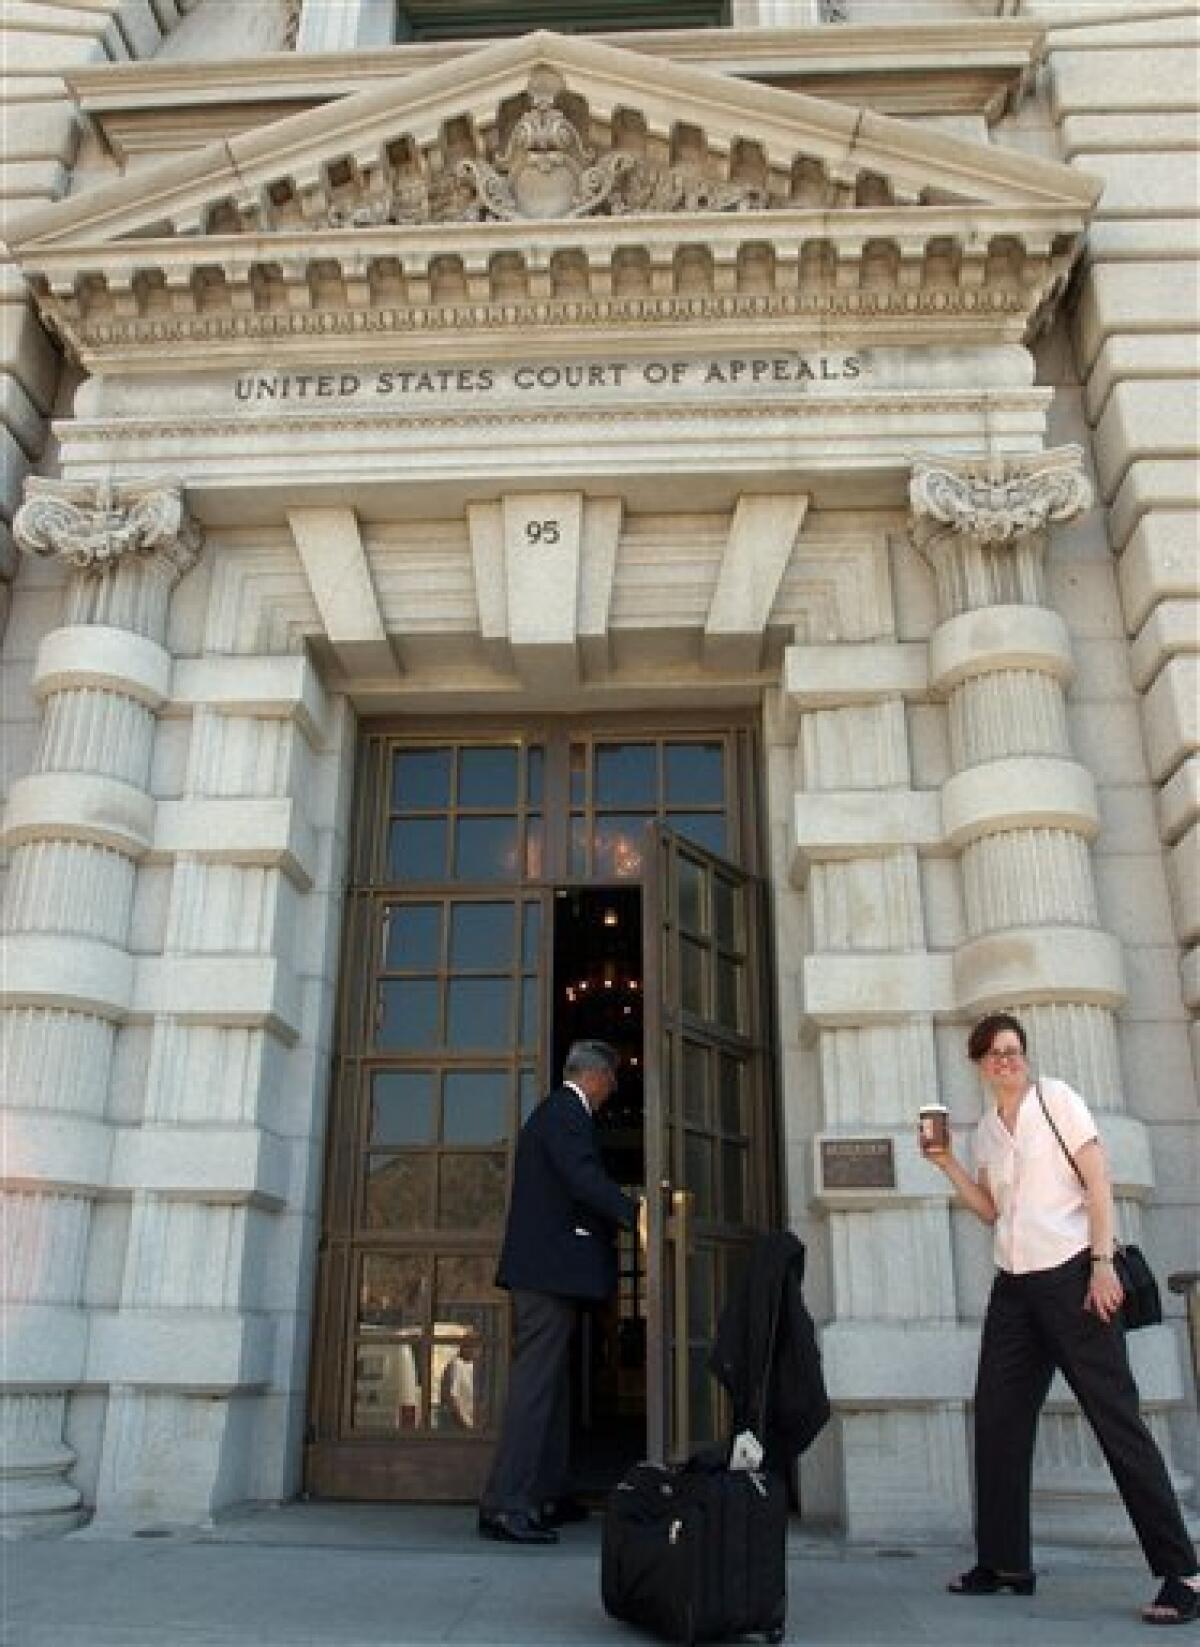 U.S. 9th Circuit Court of Appeals in San Francisco